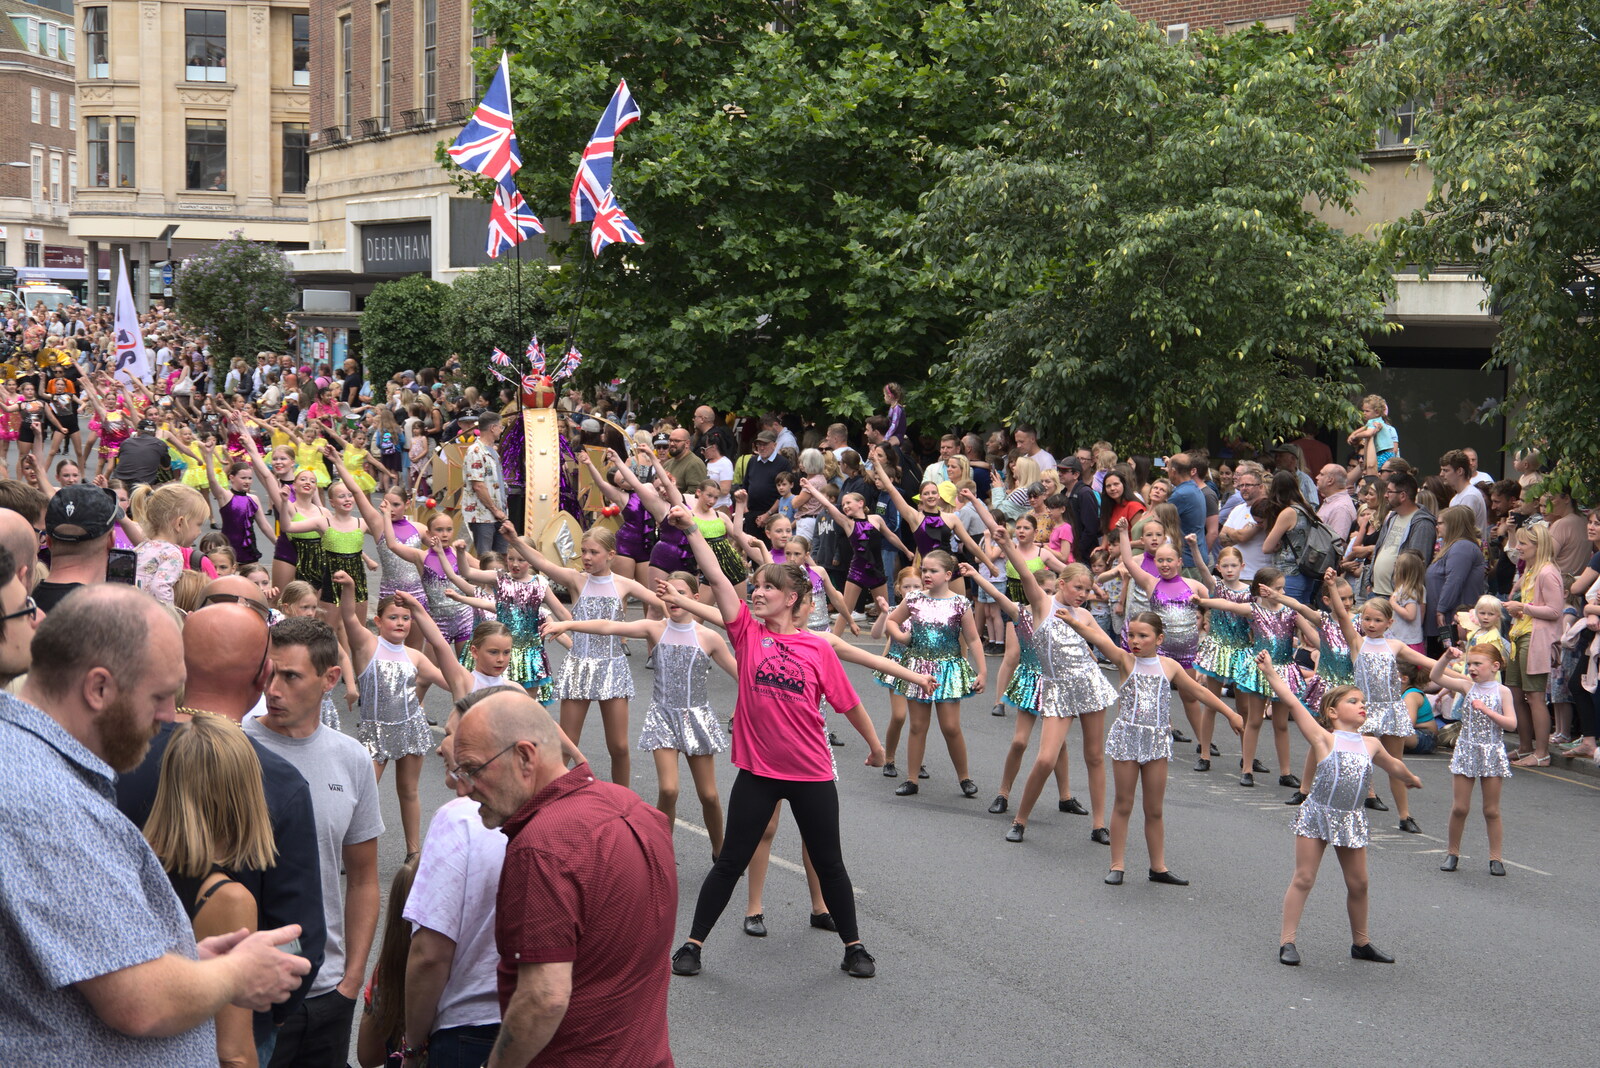 Some spangly majorettes dance around from The Lord Mayor's Procession, Norwich, Norfolk - 2nd July 2022